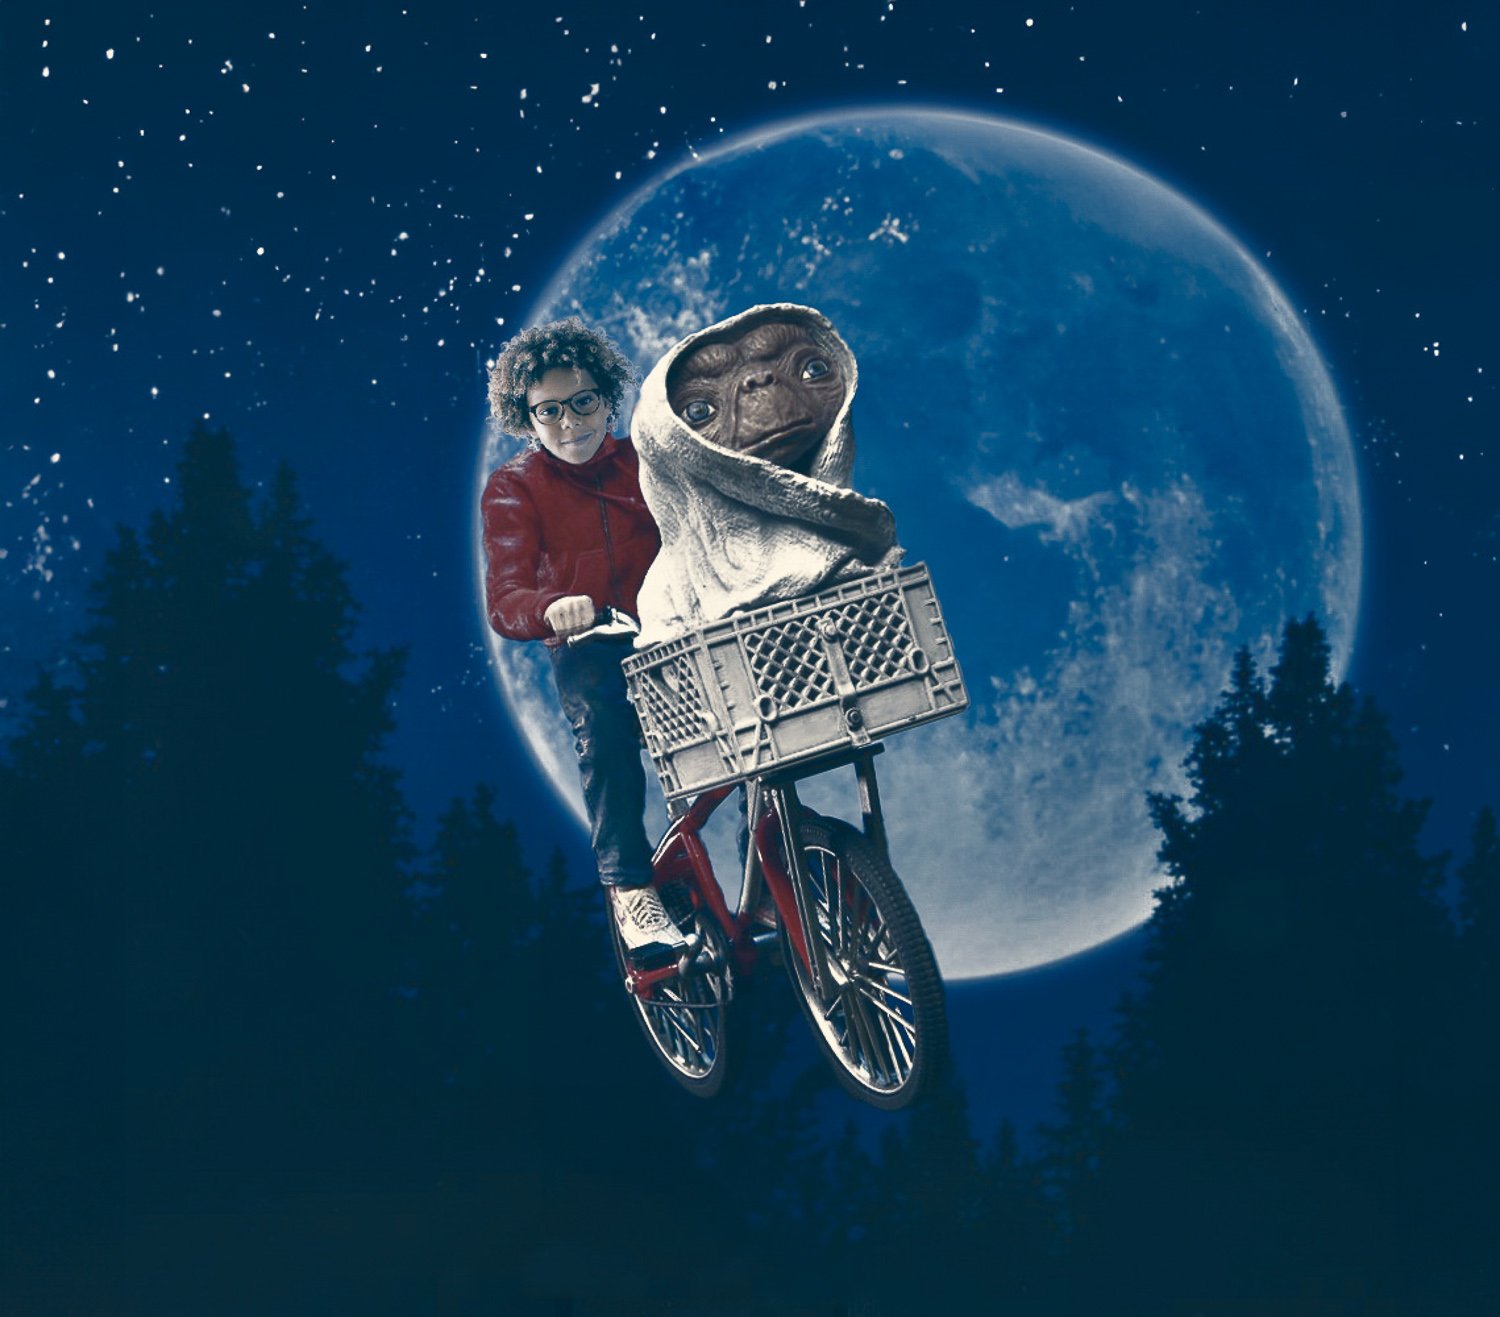 A boy on a bike in E.T. themed background